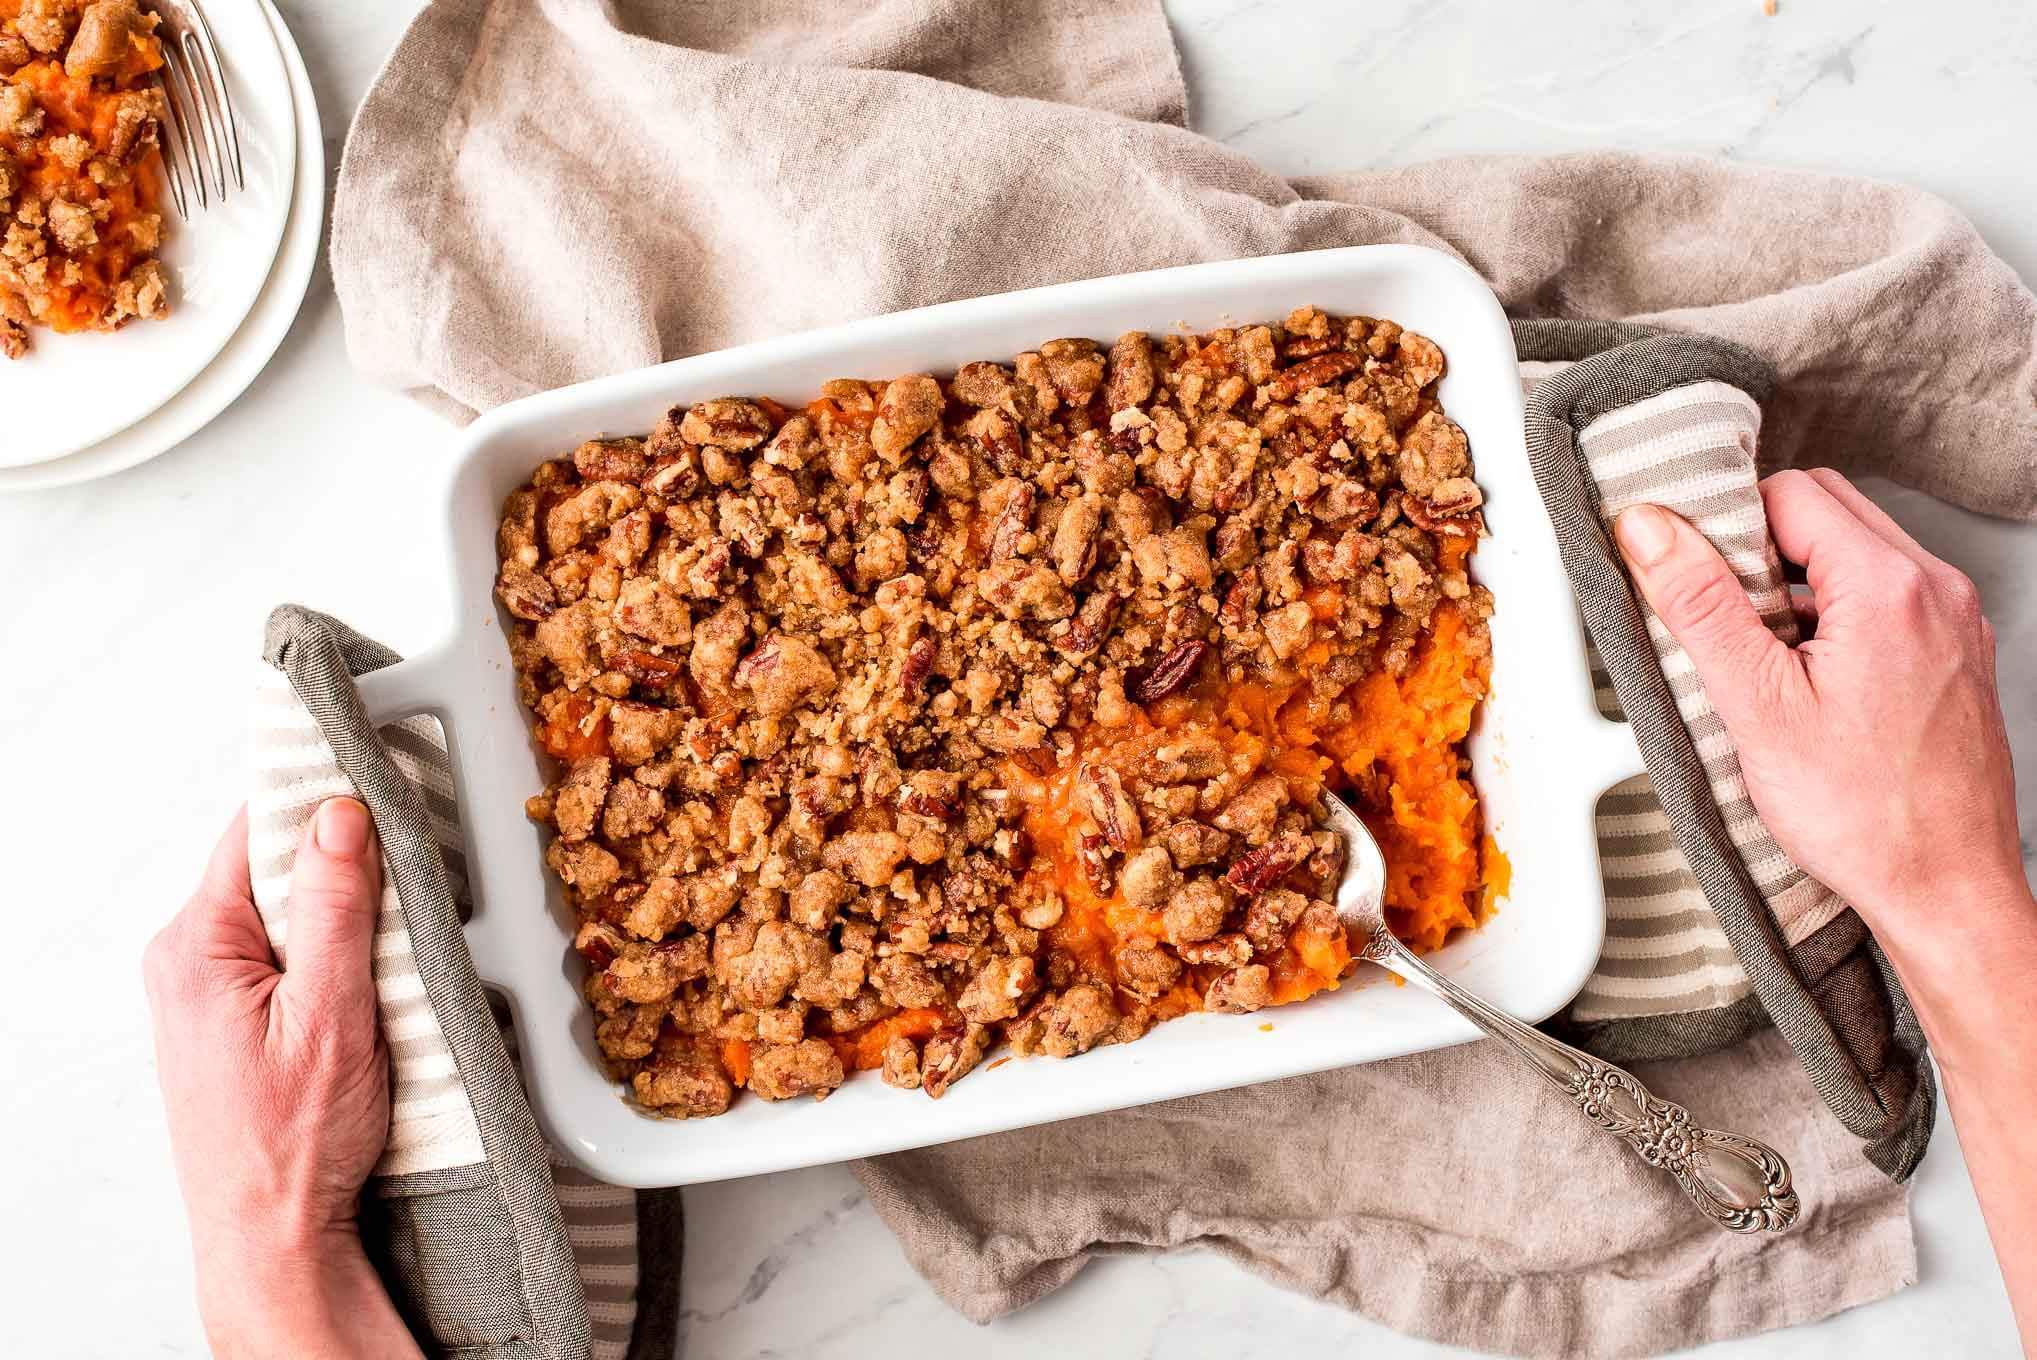 Sweet Potato Casserole: An Easy and Nutritious Dish to Prepare!